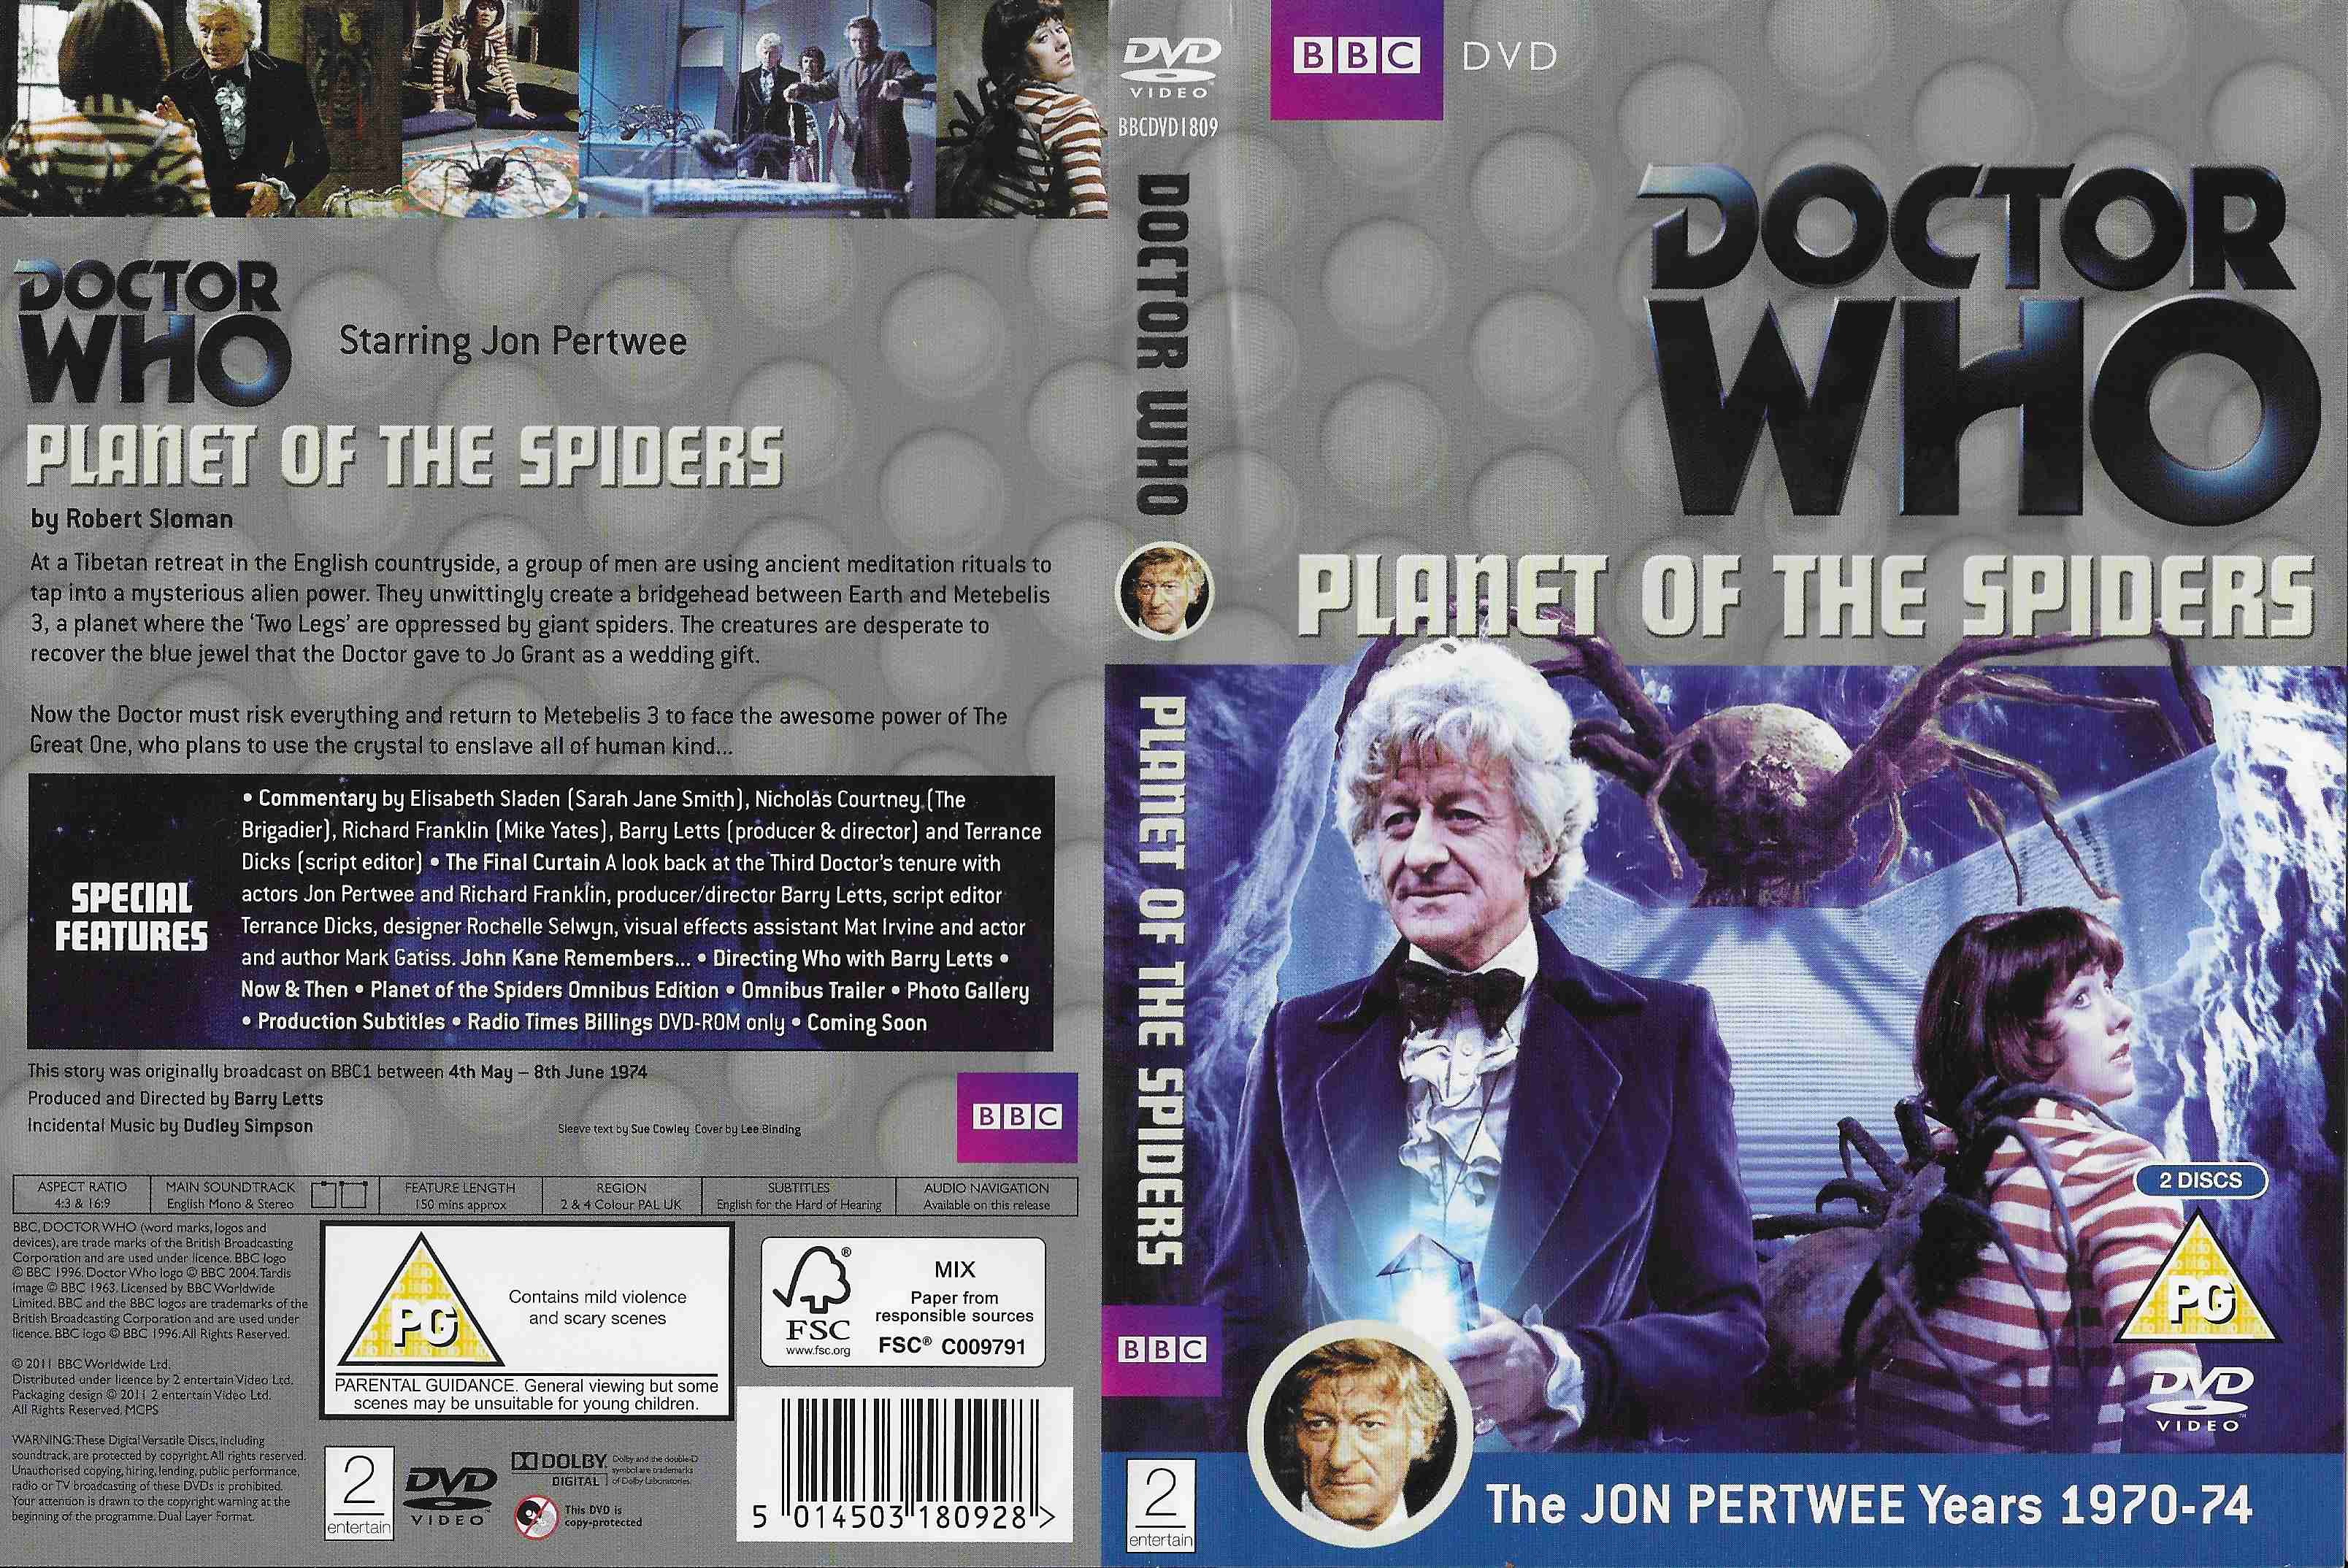 Picture of BBCDVD 1809 Doctor Who - Planet of the spiders by artist Robert Sloman from the BBC records and Tapes library